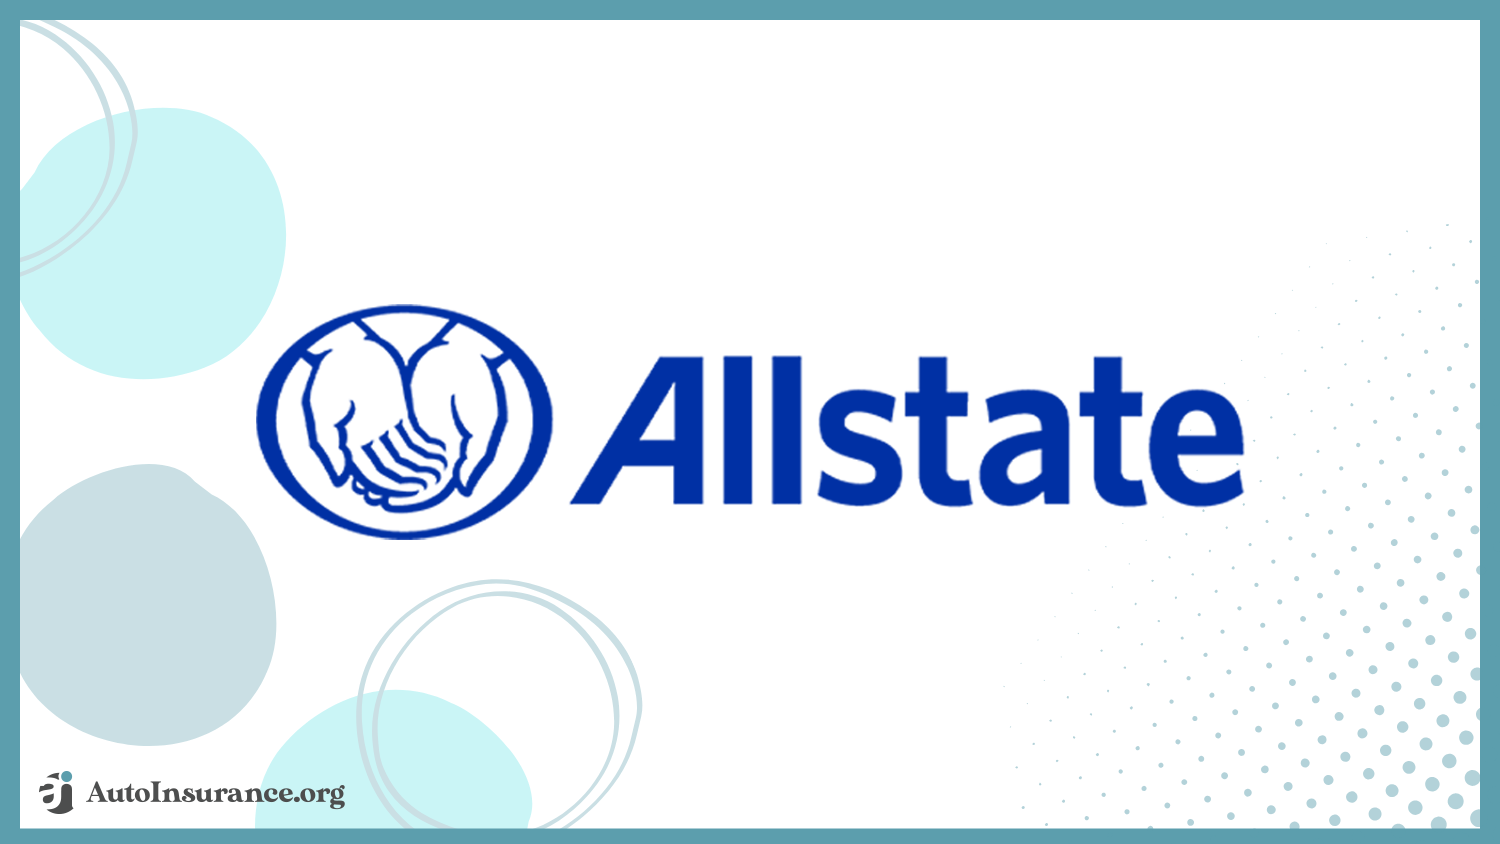 Allstate: Best Auto Insurance for Real Estate Agents